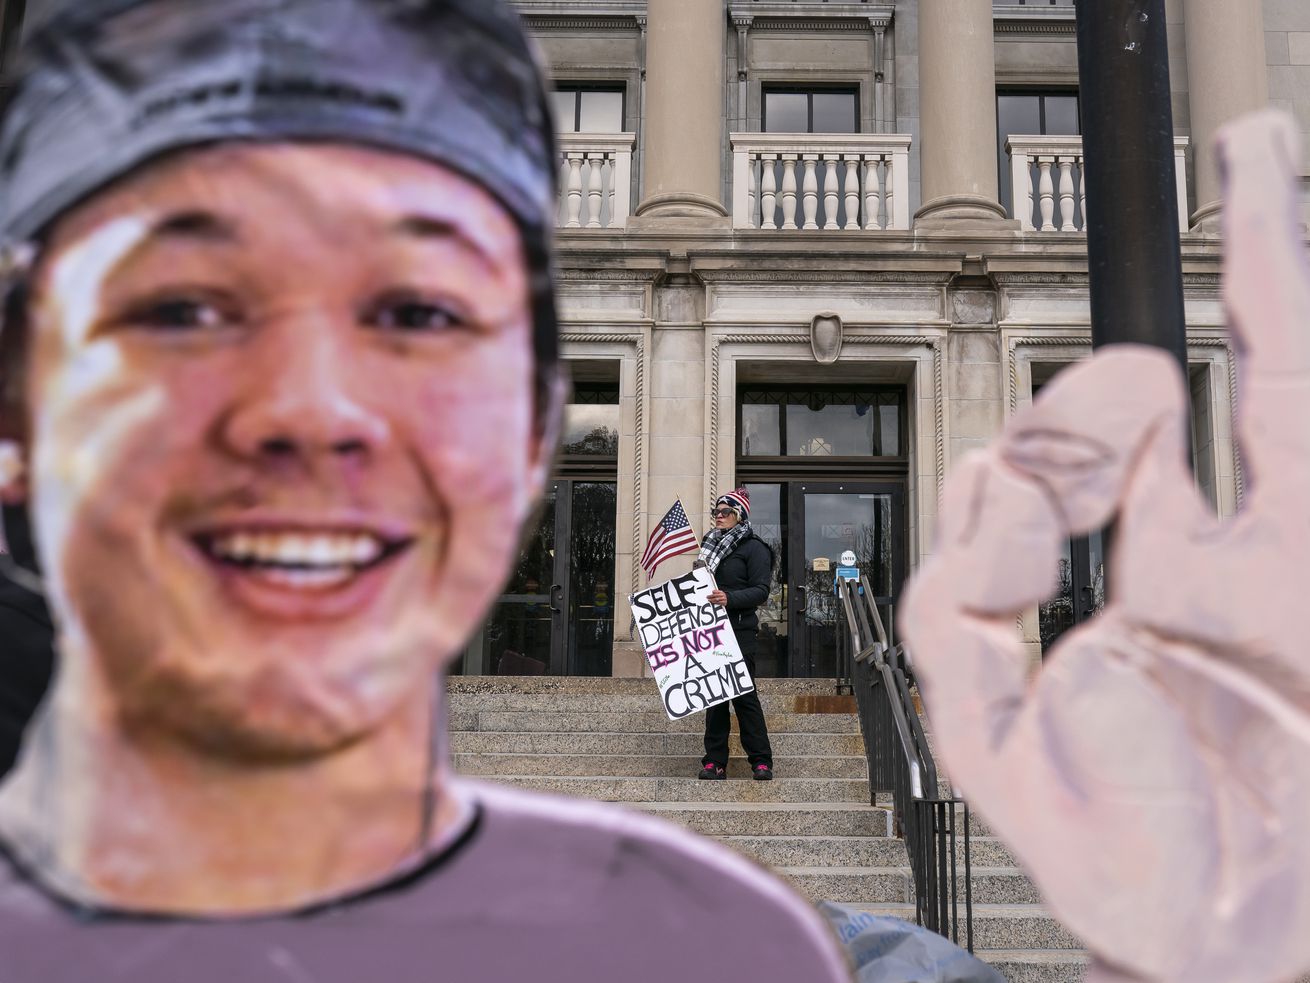 A cut-out of Kyle Rittenhouse’s face and hand in the foreground, the courthouse and a protester in the background.